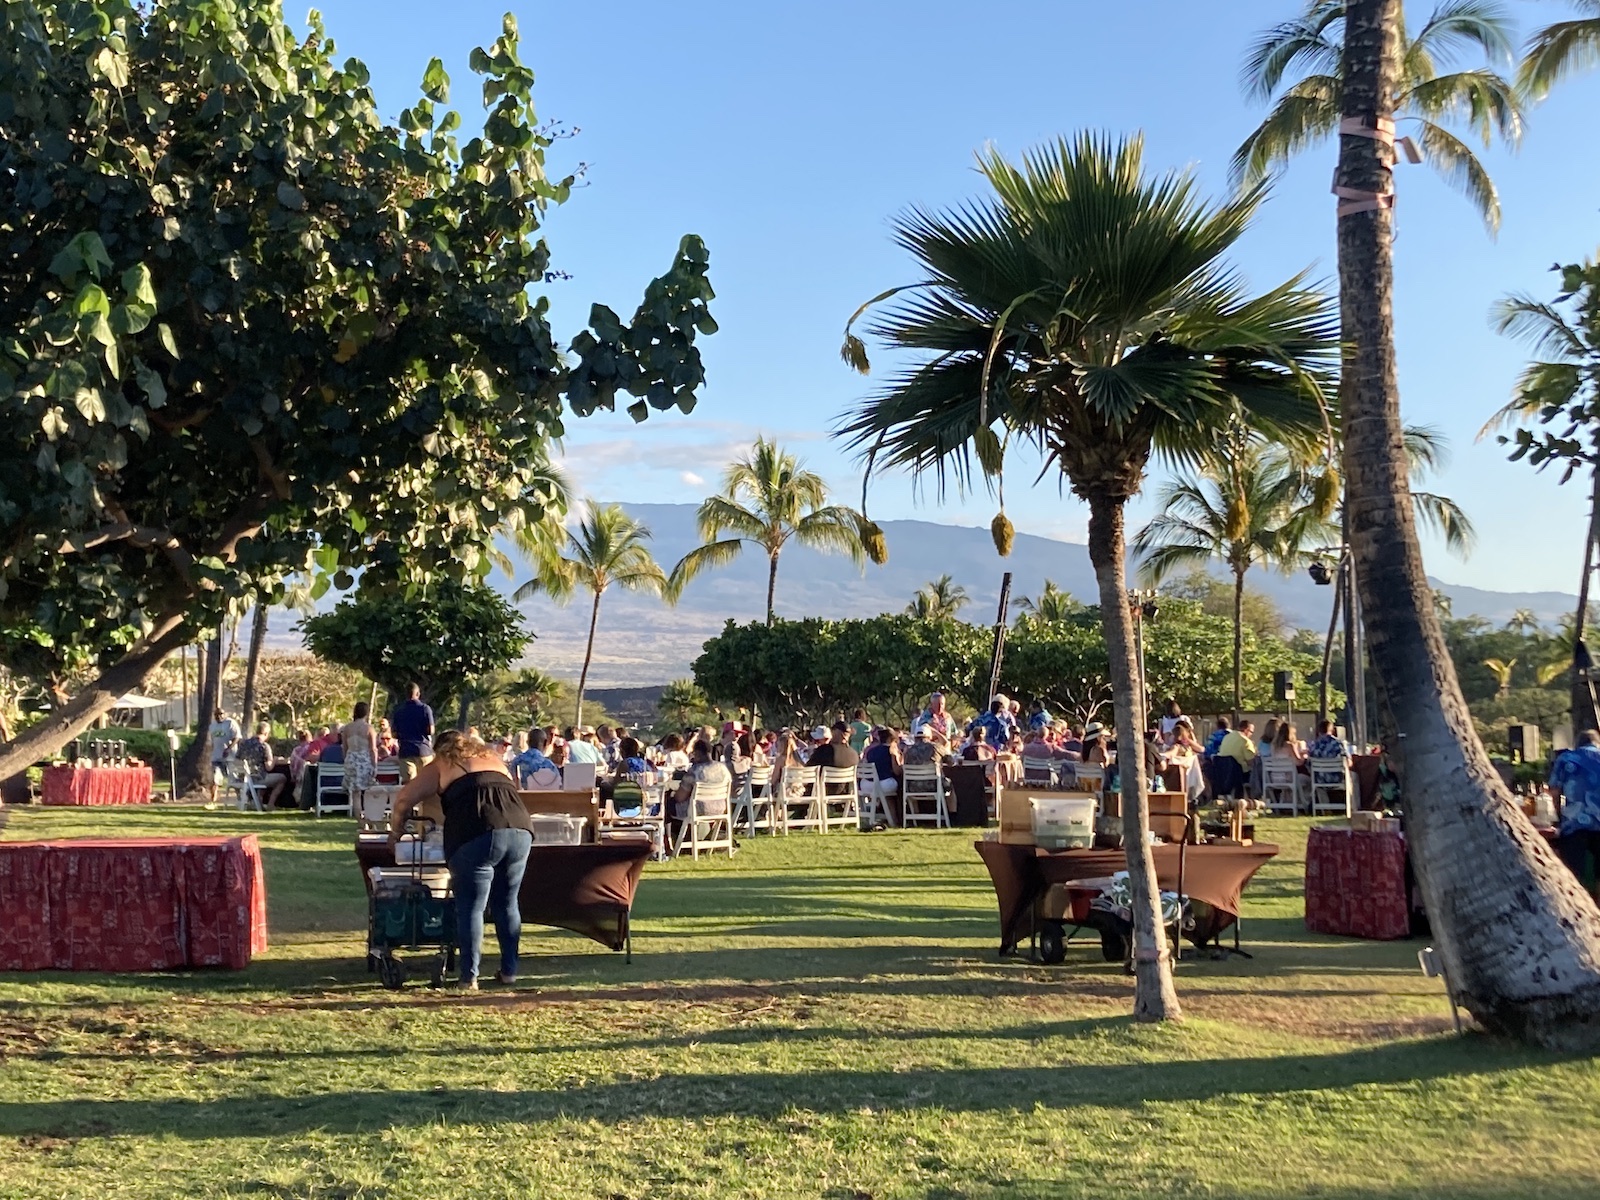 Photo of people eating at large banquet tables in a grassy area of the Waikoloa Beach Marriott Resort Spa, waiting for the sunset luau